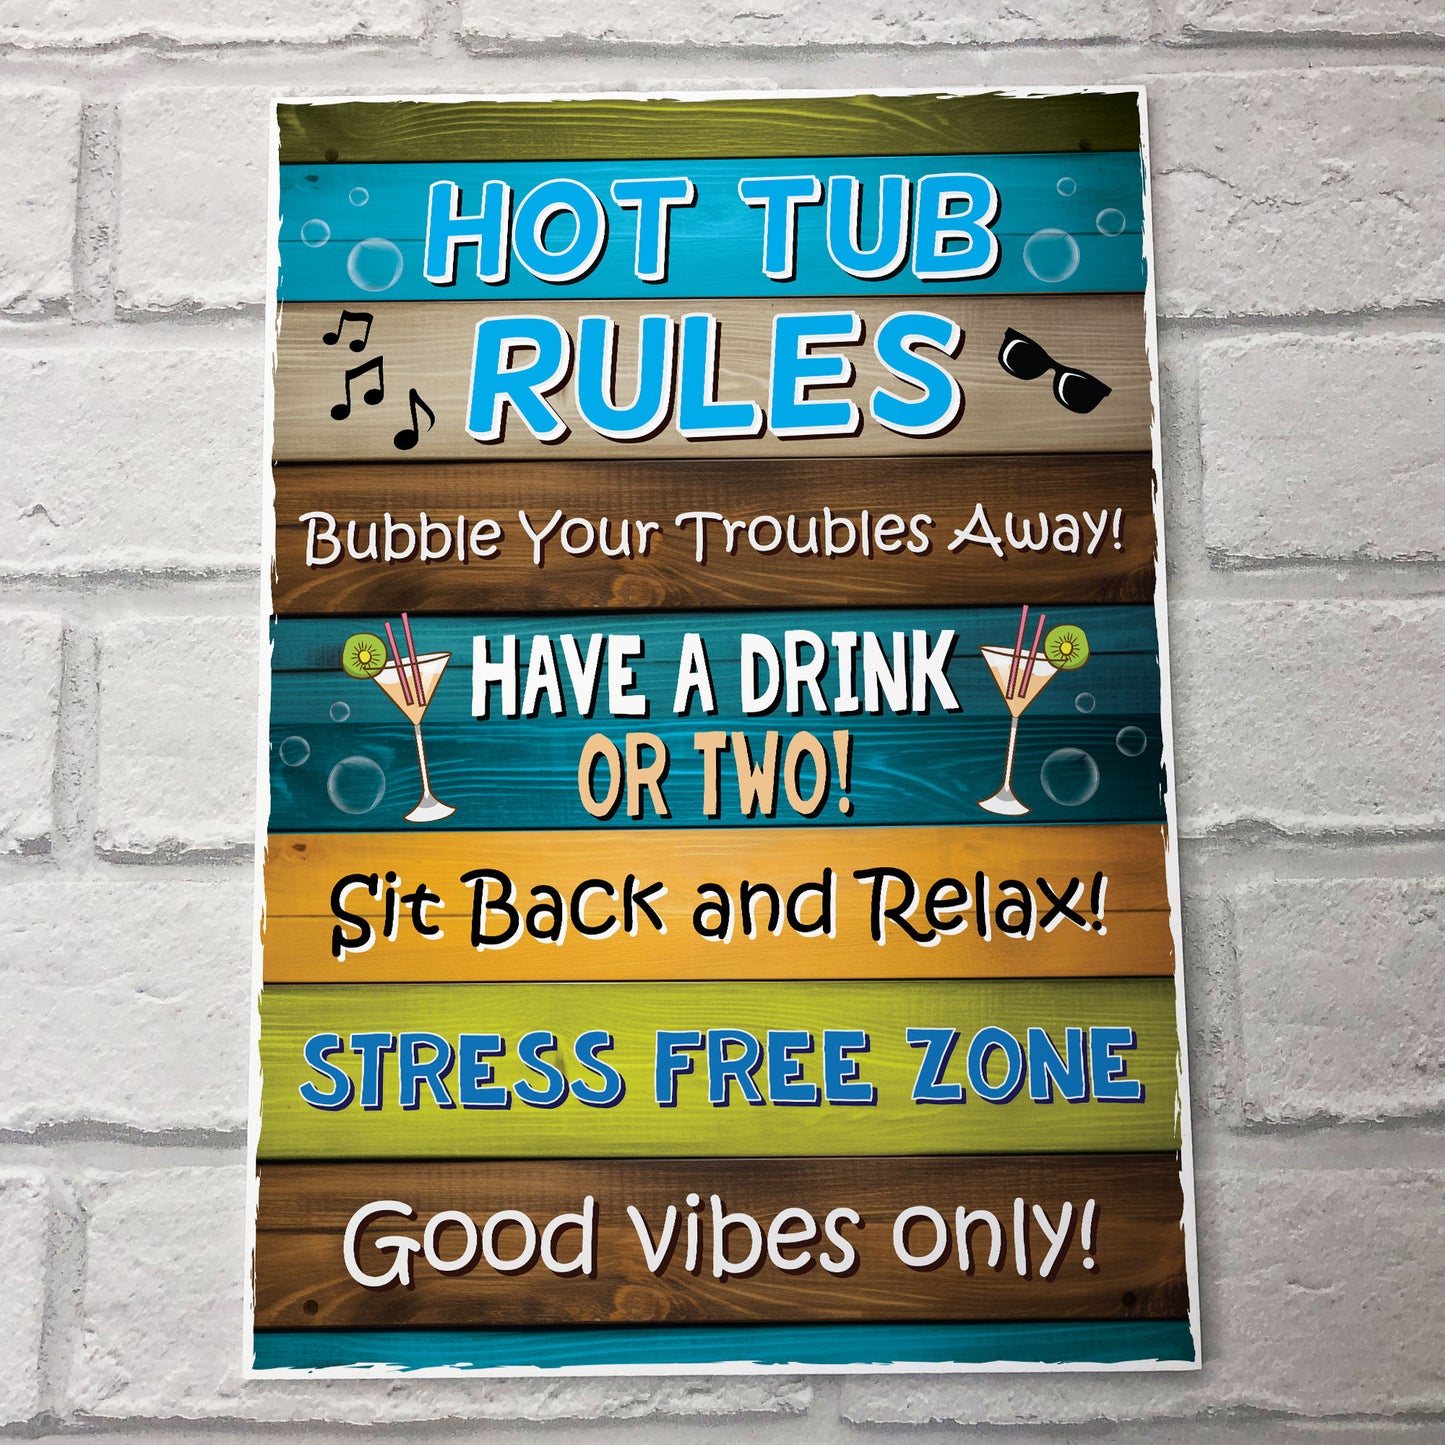 Funny Hot Tub Rules Wall Plaque Novelty Hot Tub Outdoor Garden